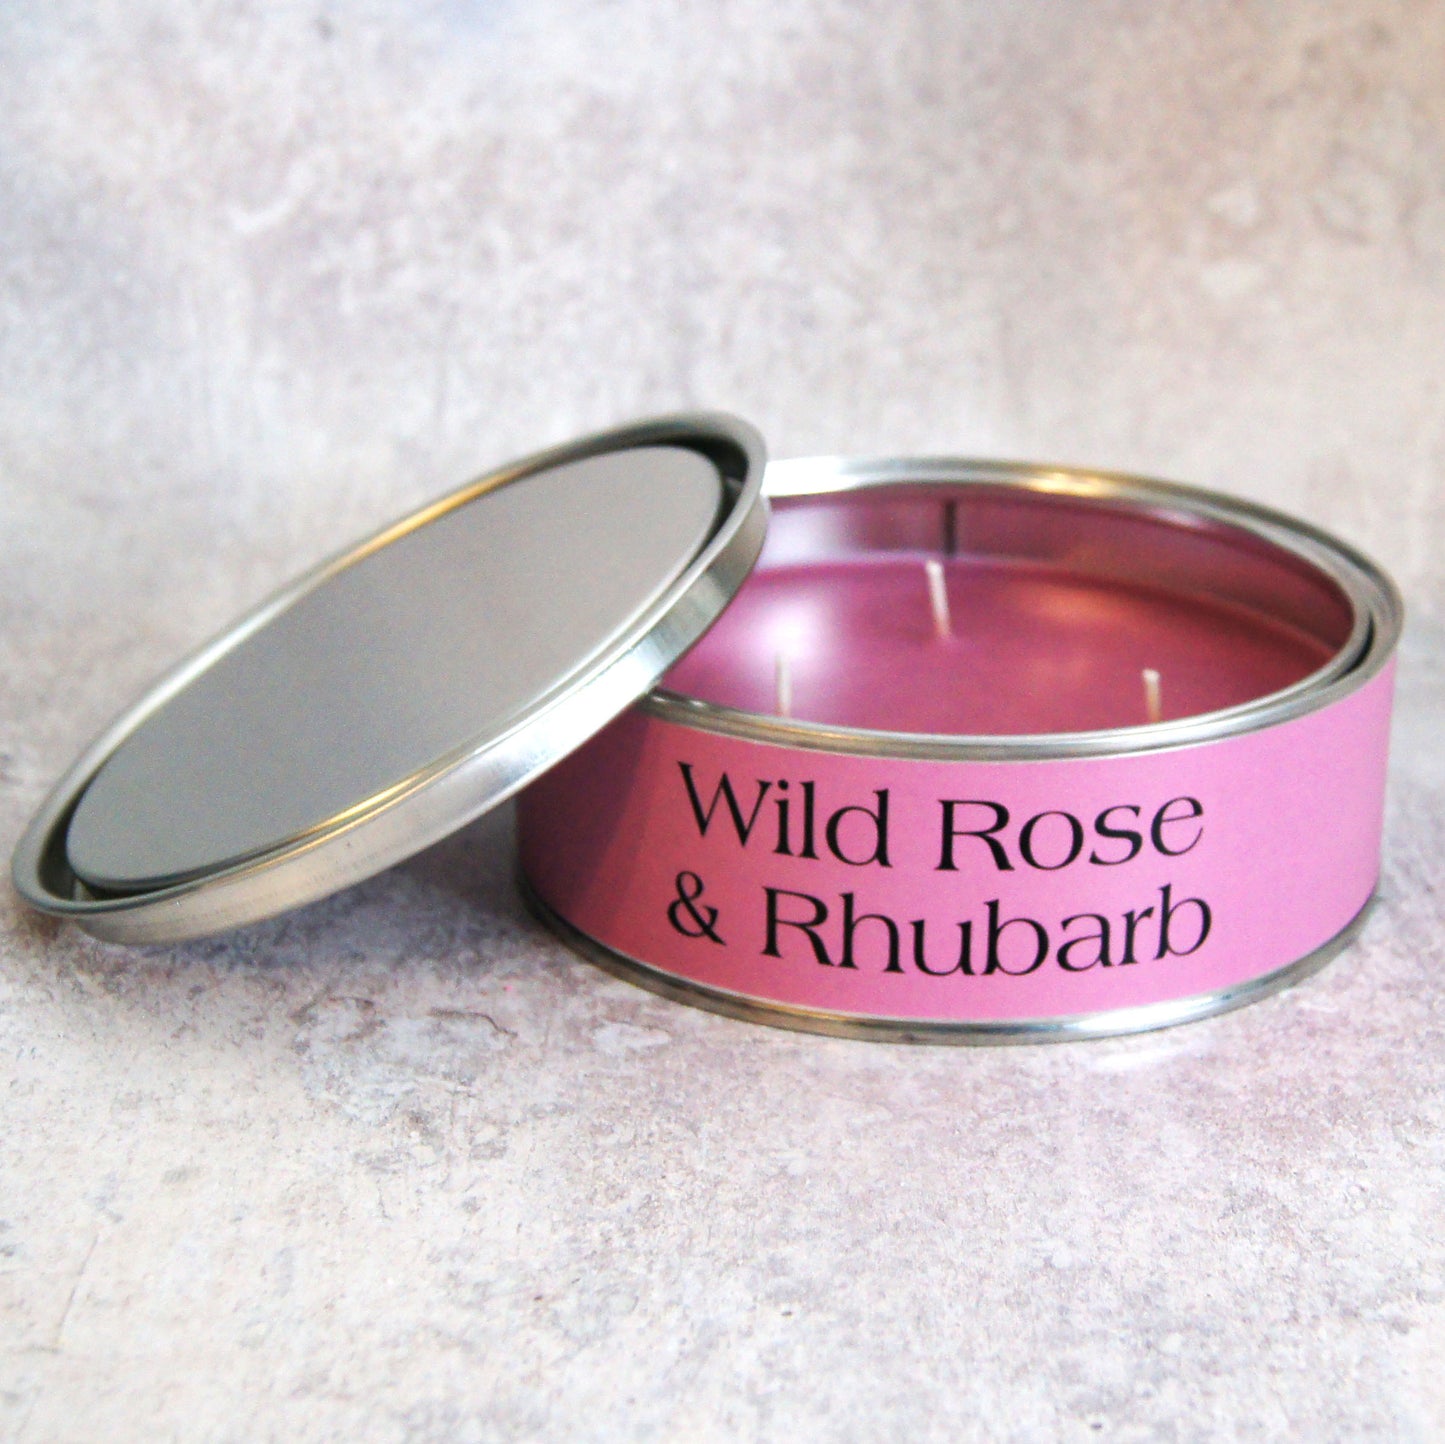 Pintail Candles Wild Rose & Rhubarb Candle